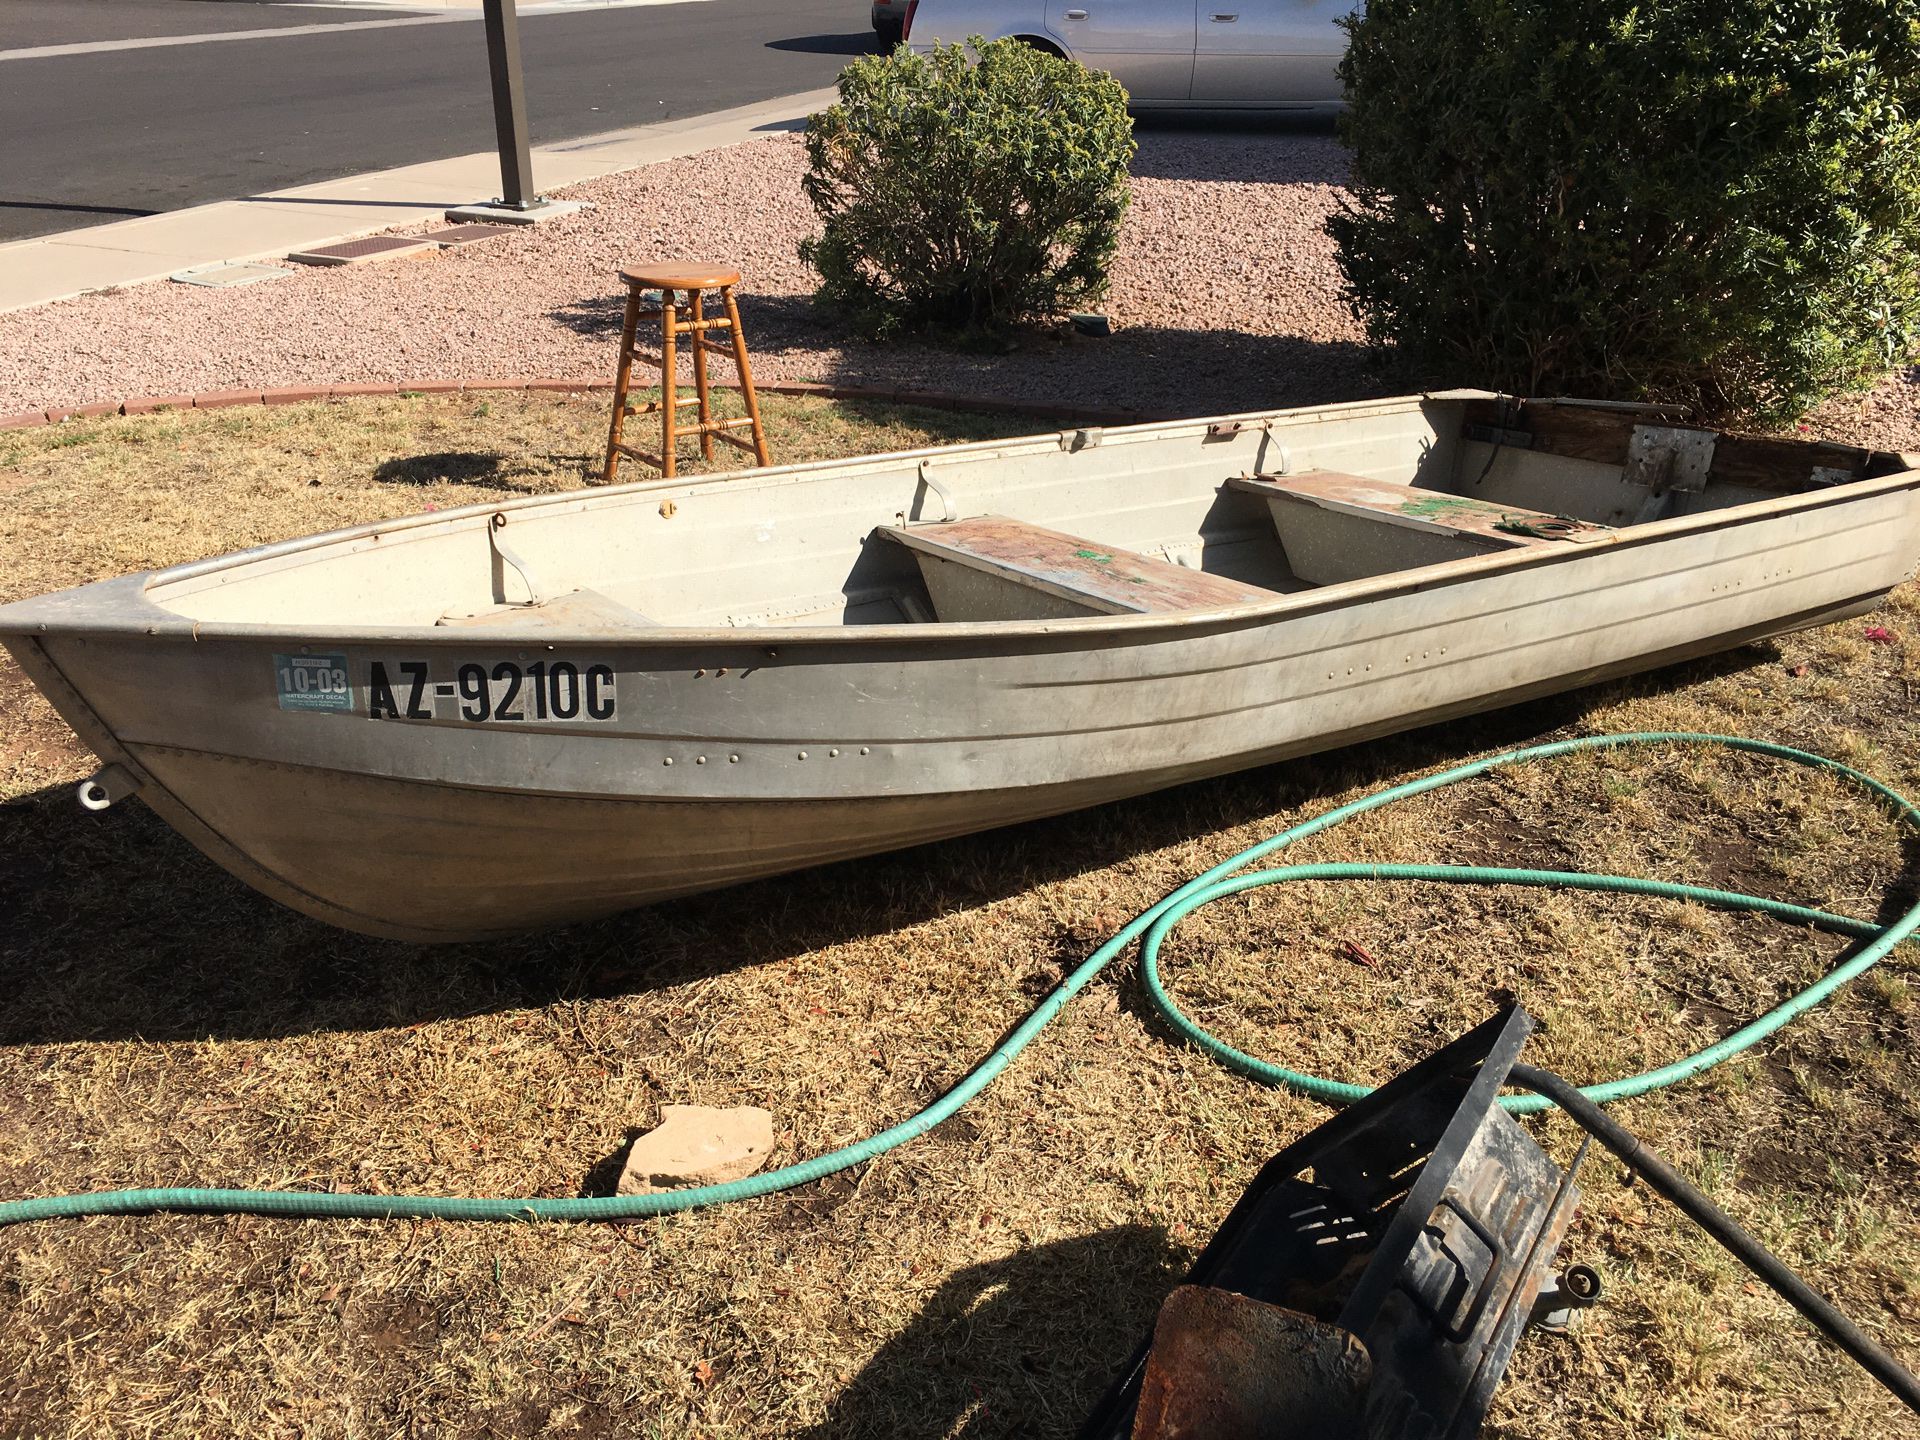 12ft aluminum fishing boat, comes with 2 seats and a trolling motor, need gone.